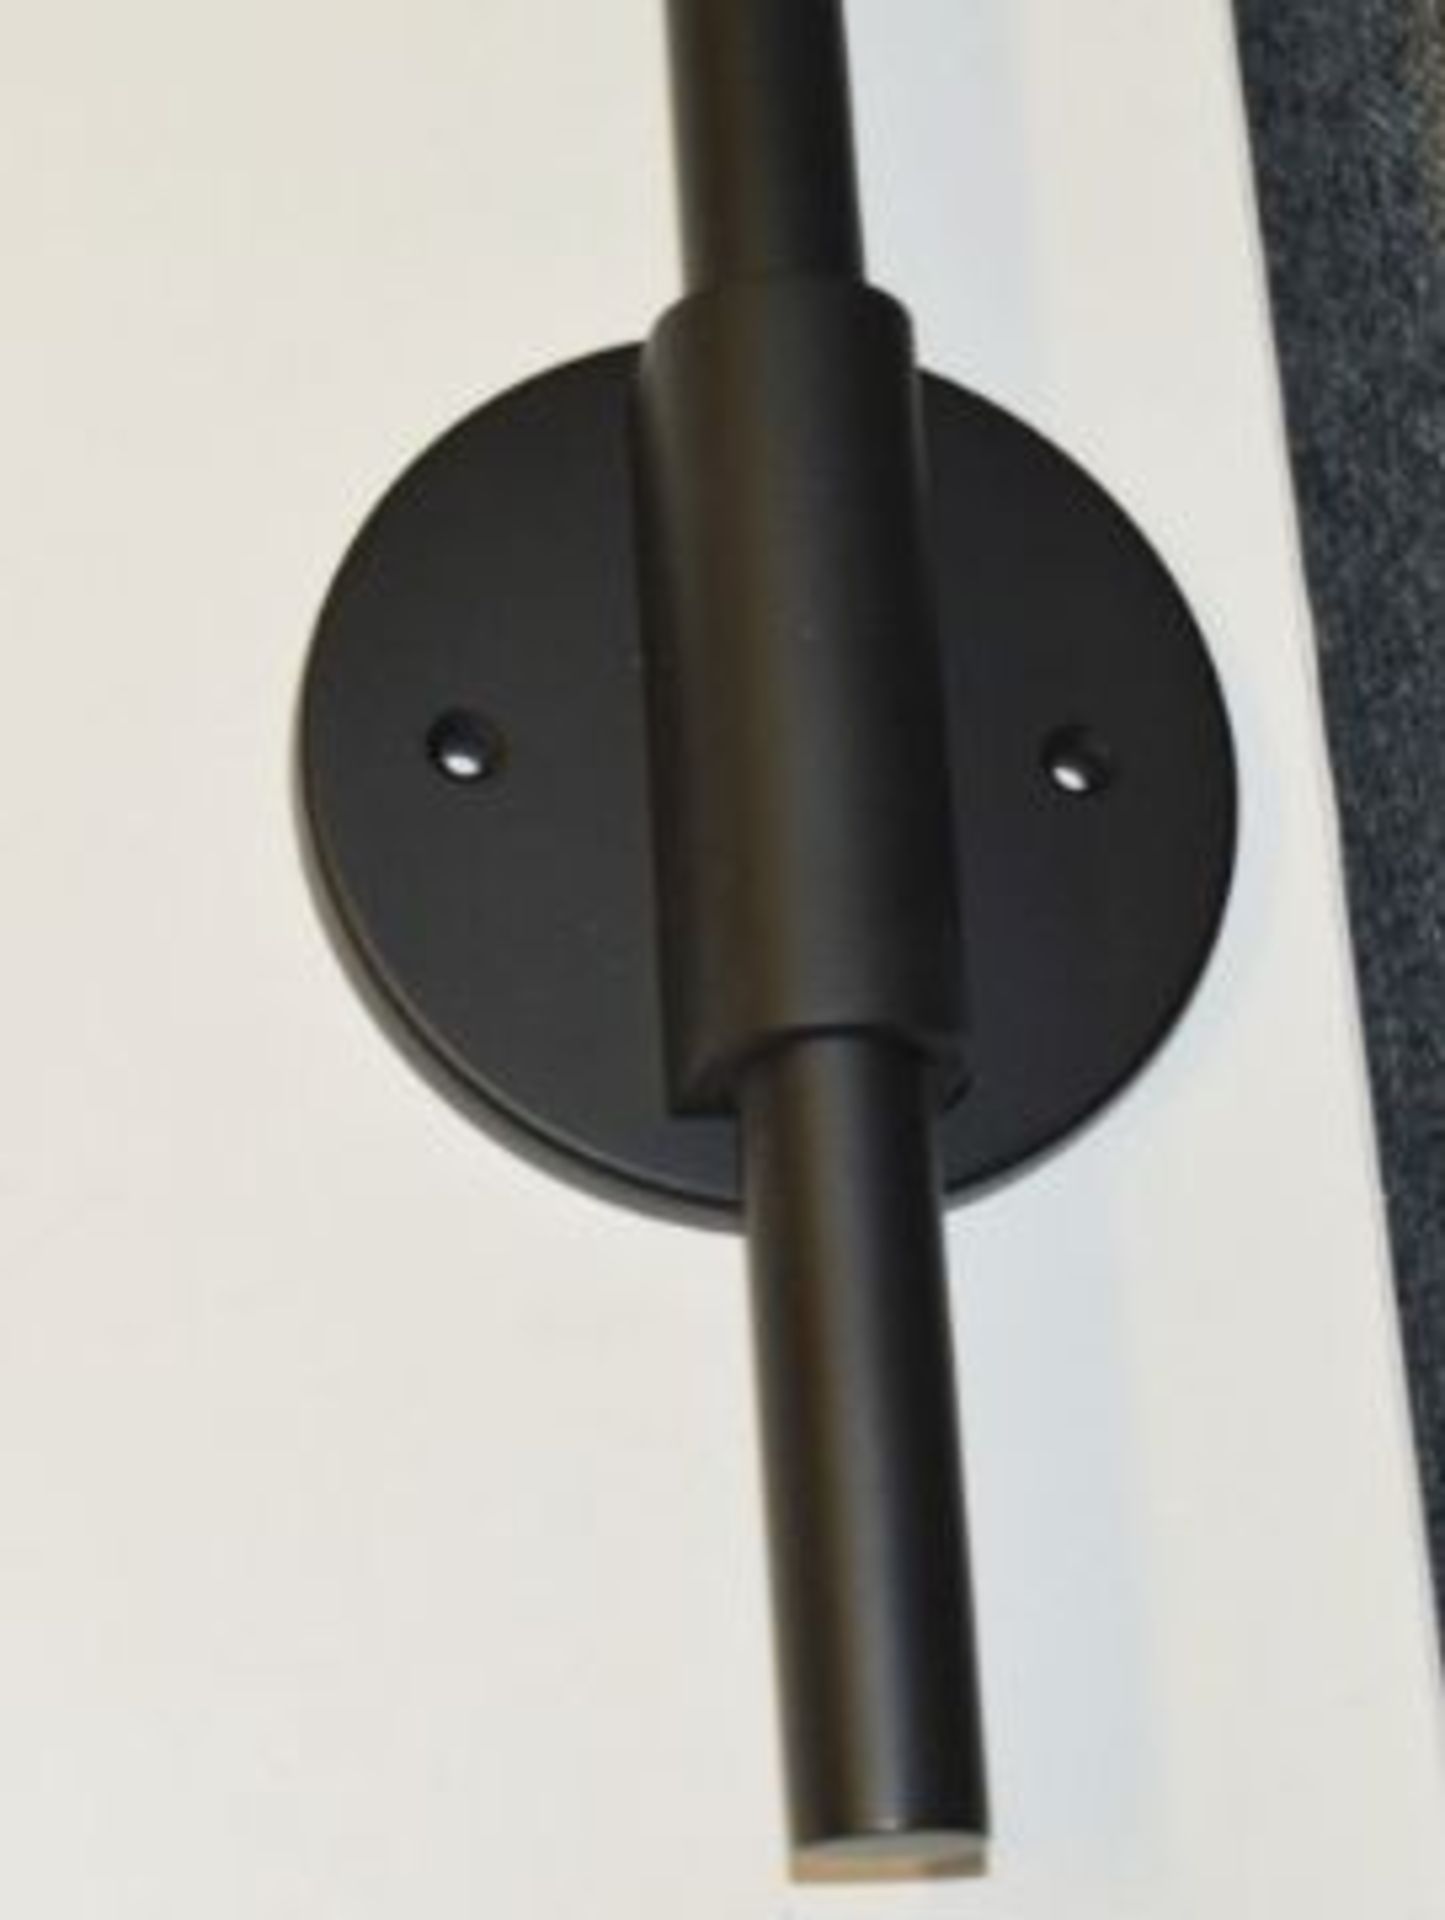 1 x CHELSOM Commercial Hotel Wall Light In A Black Powder Coated Finish - Dimensions: H86 x 40cm - Image 5 of 6